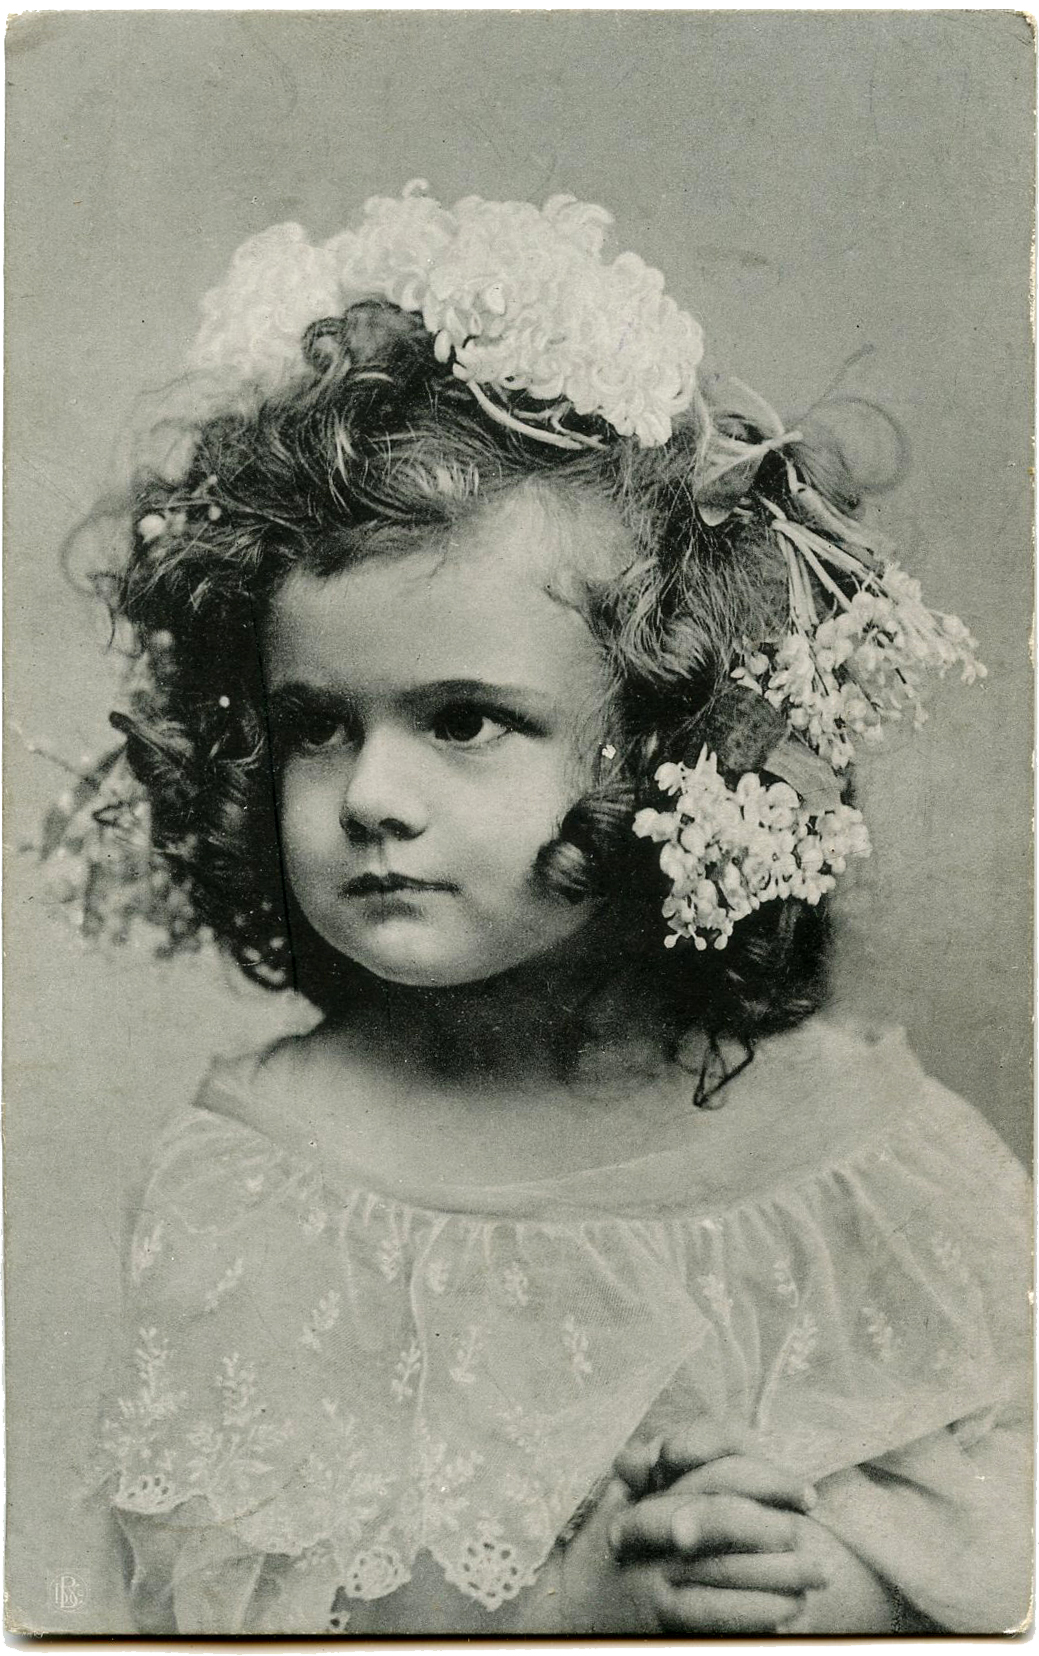 Antique Photography Vintage Photos Children Vintage Real Photograph Postcard Little Girl with Flowers